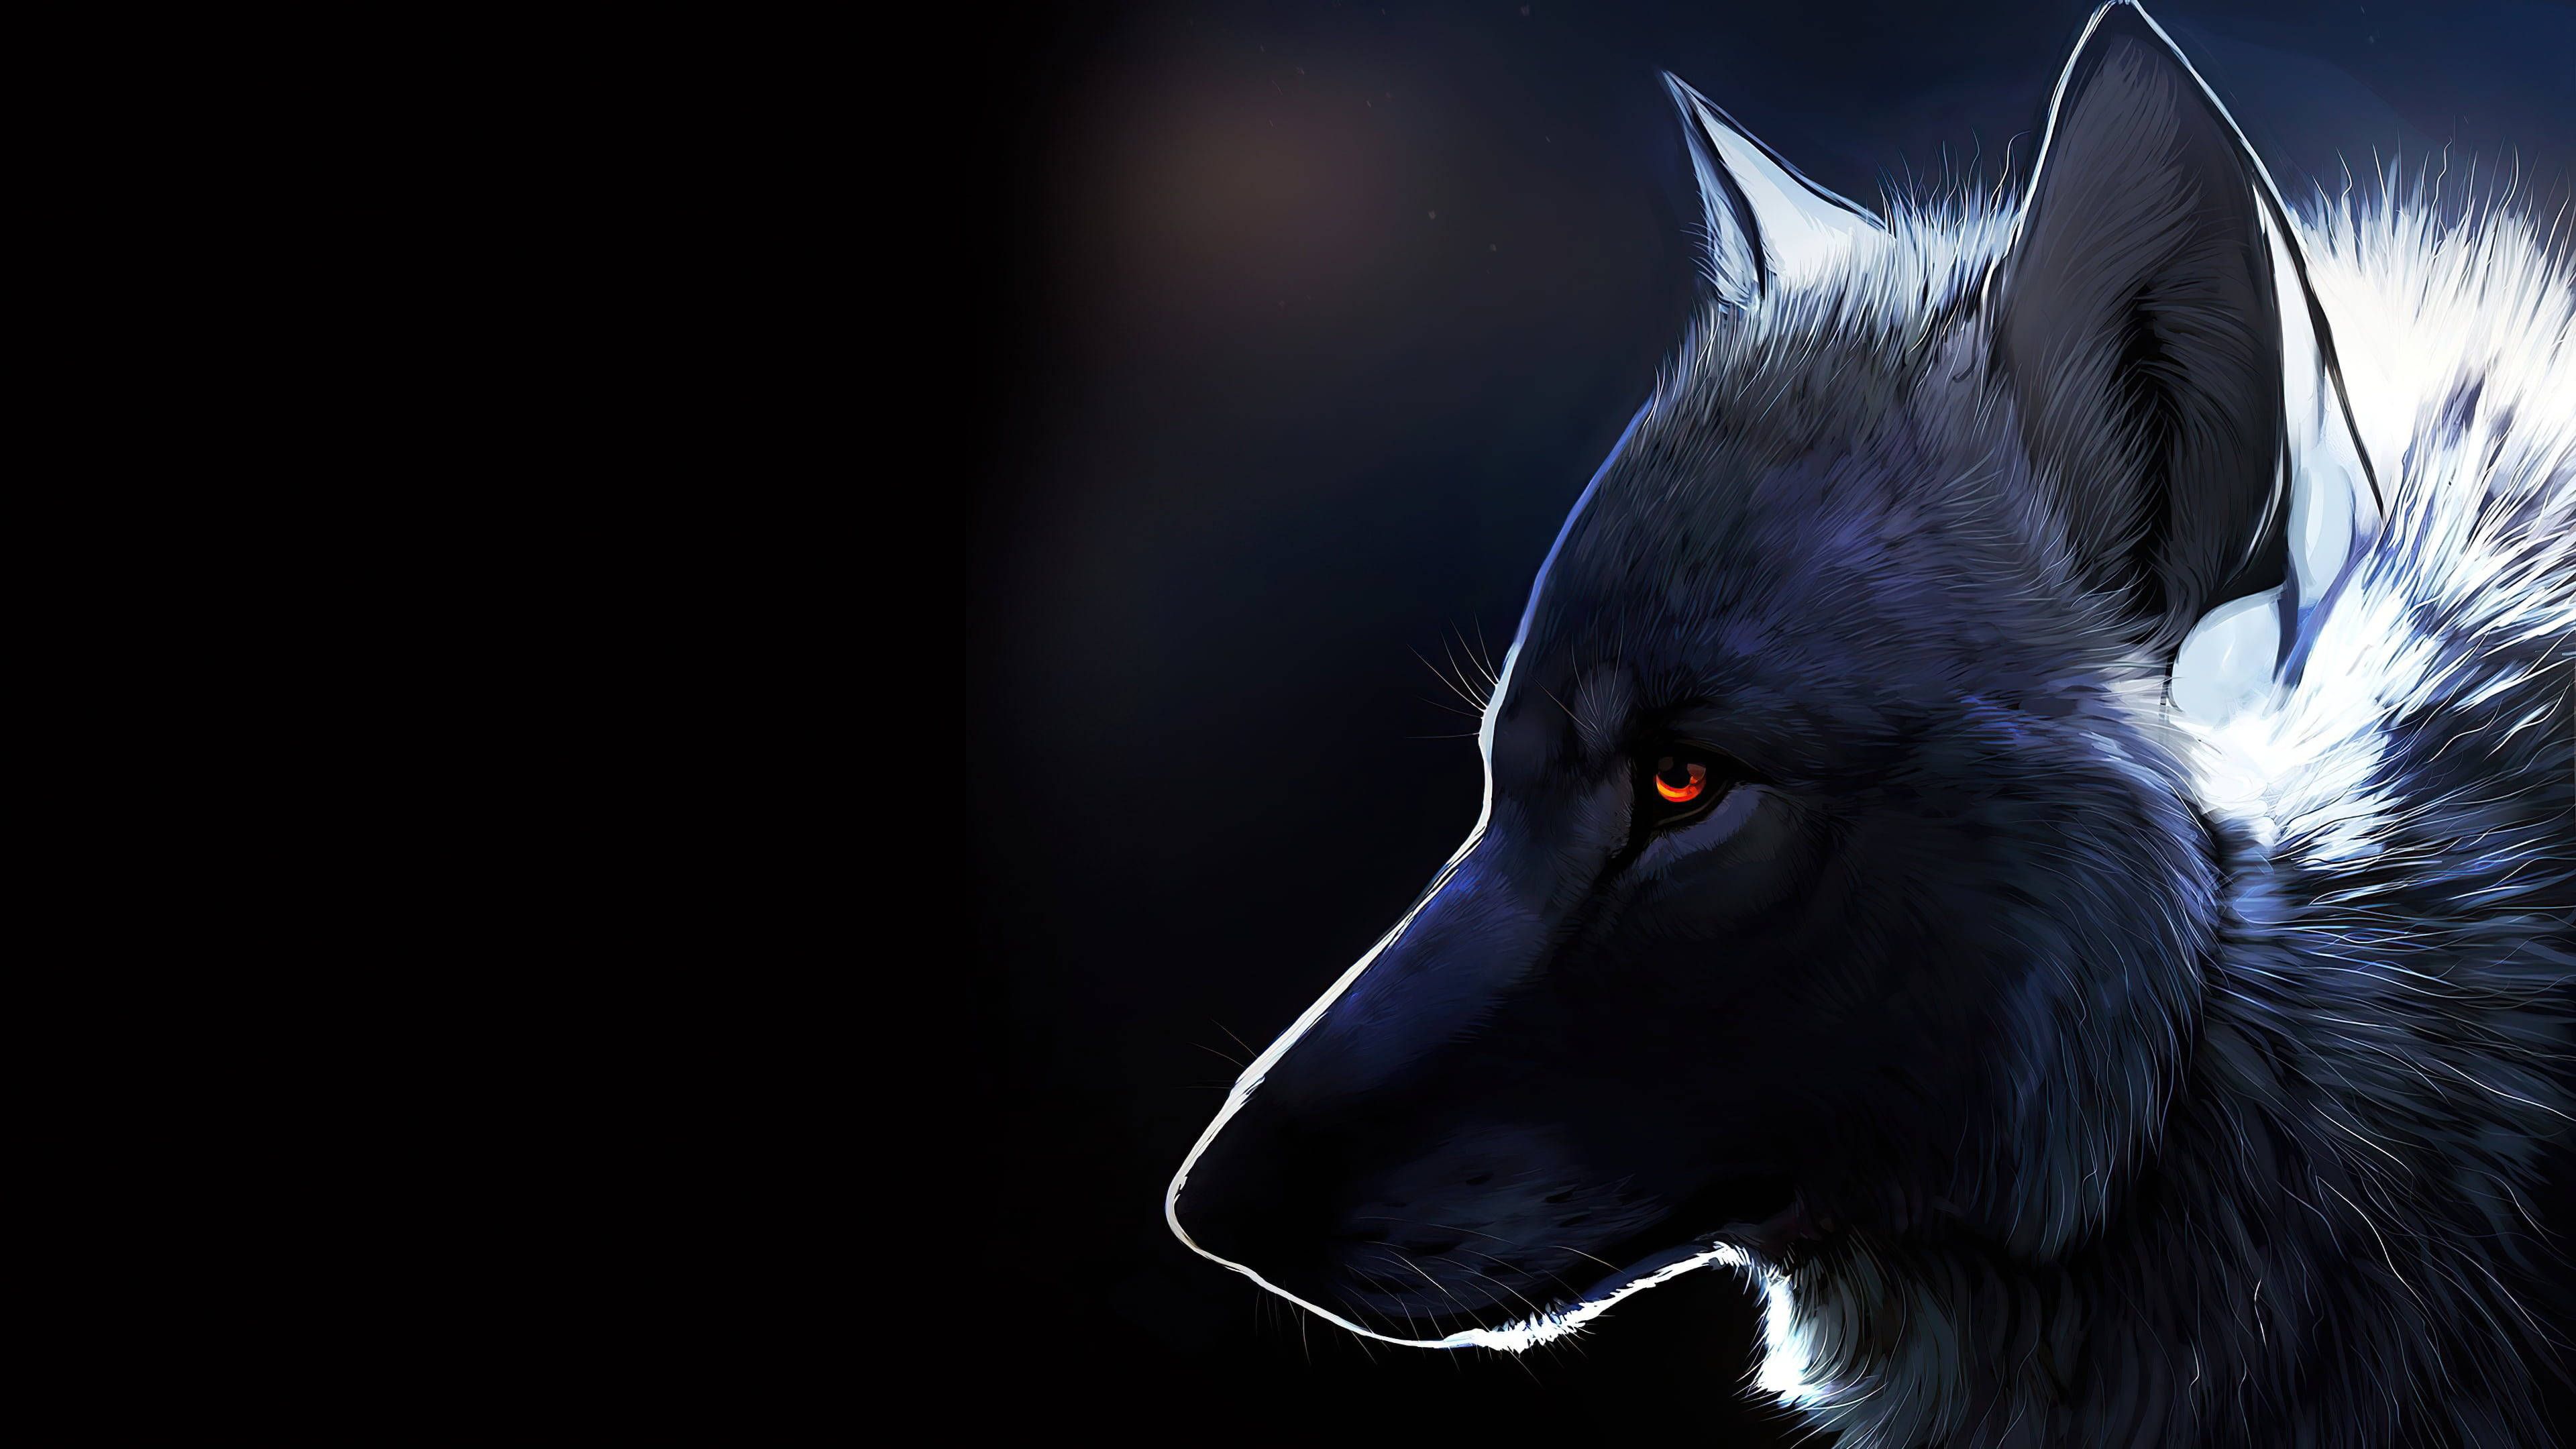 A close up of the head and eyes on an animal - Wolf